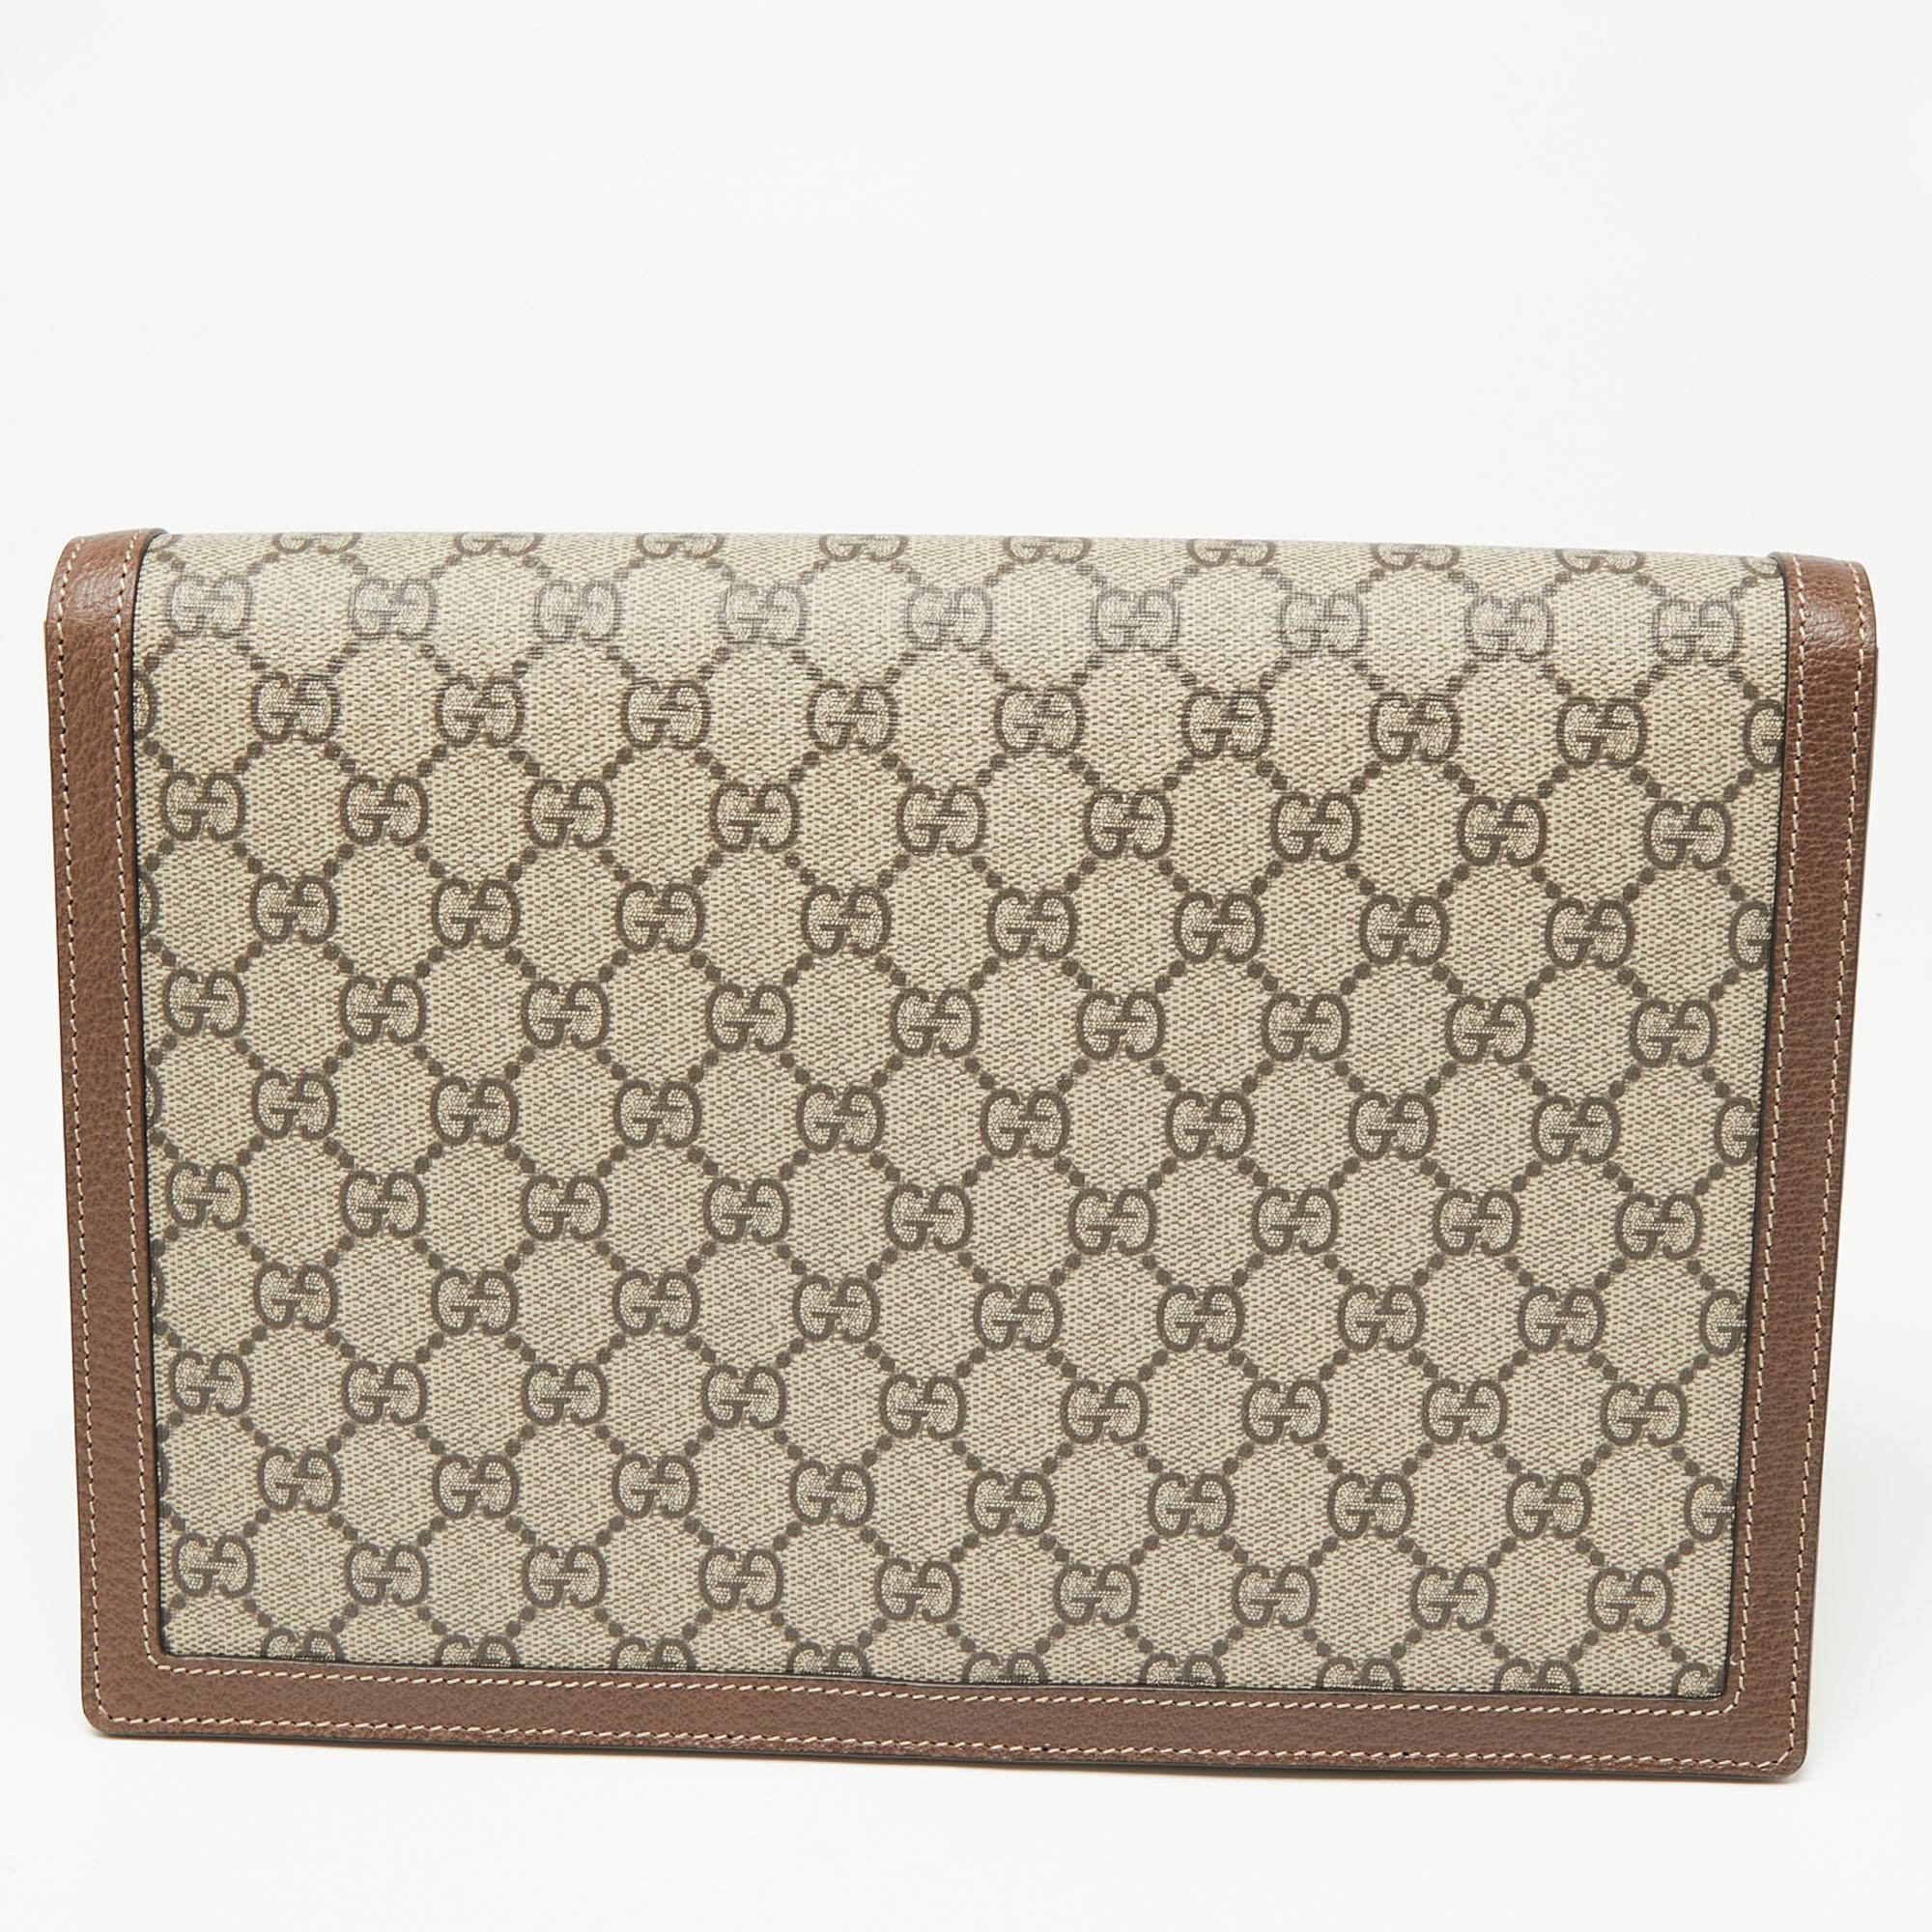 This fashionable pouch by Gucci is easy to carry and is a fusion of trend and functionality. An excellent complement to your charm is this pouch in shades of beige and brown. The plush texture of the coated canvas and leather used for this piece